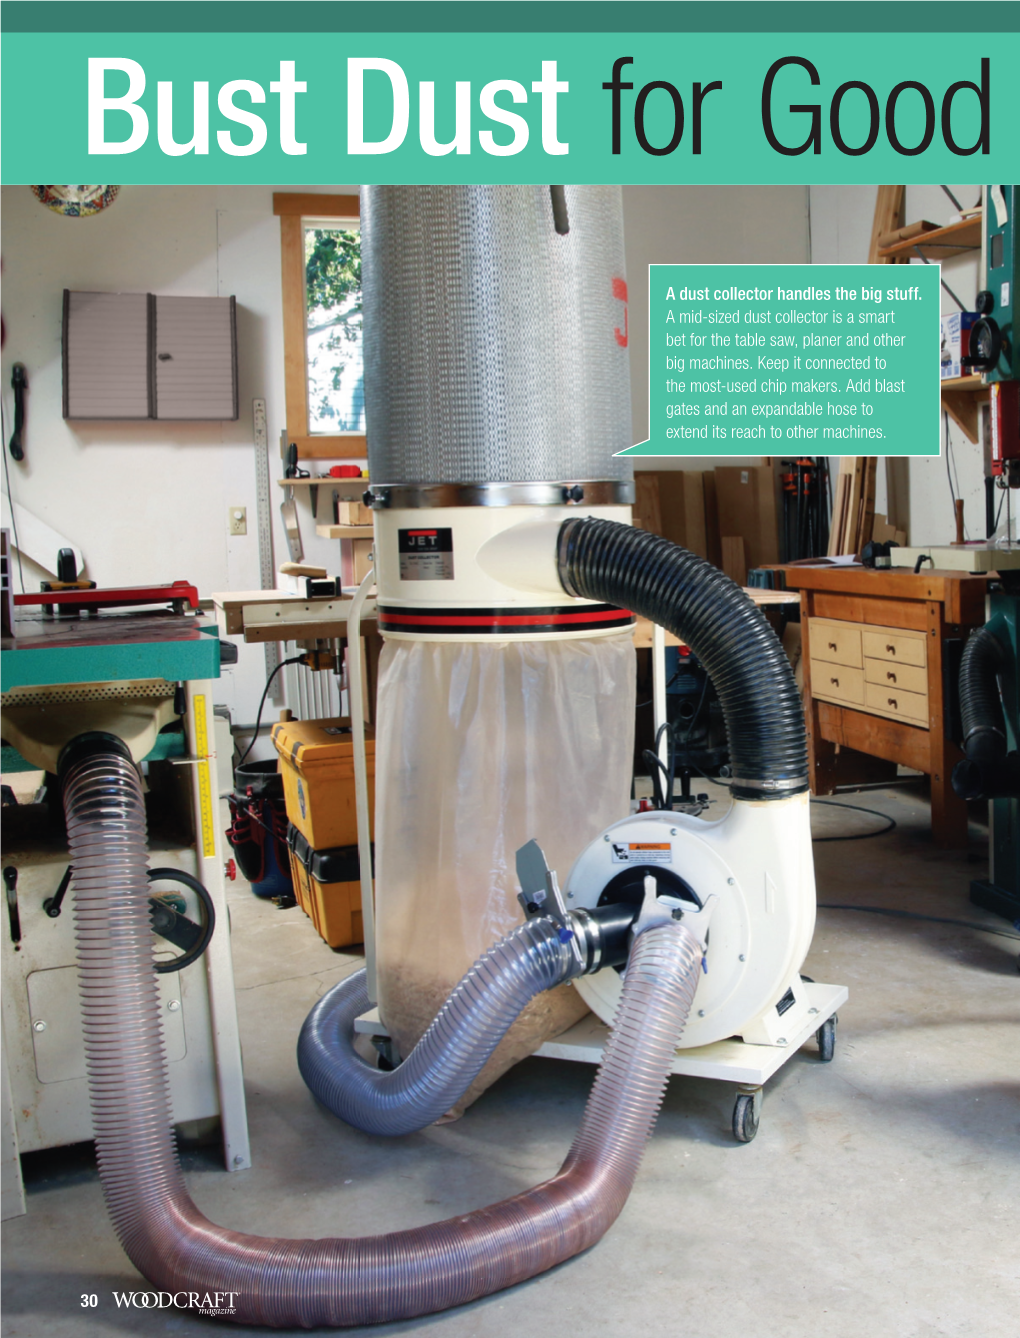 A Dust Collector Handles the Big Stuff. a Mid-Sized Dust Collector Is a Smart Bet for the Table Saw, Planer and Other Big Machines